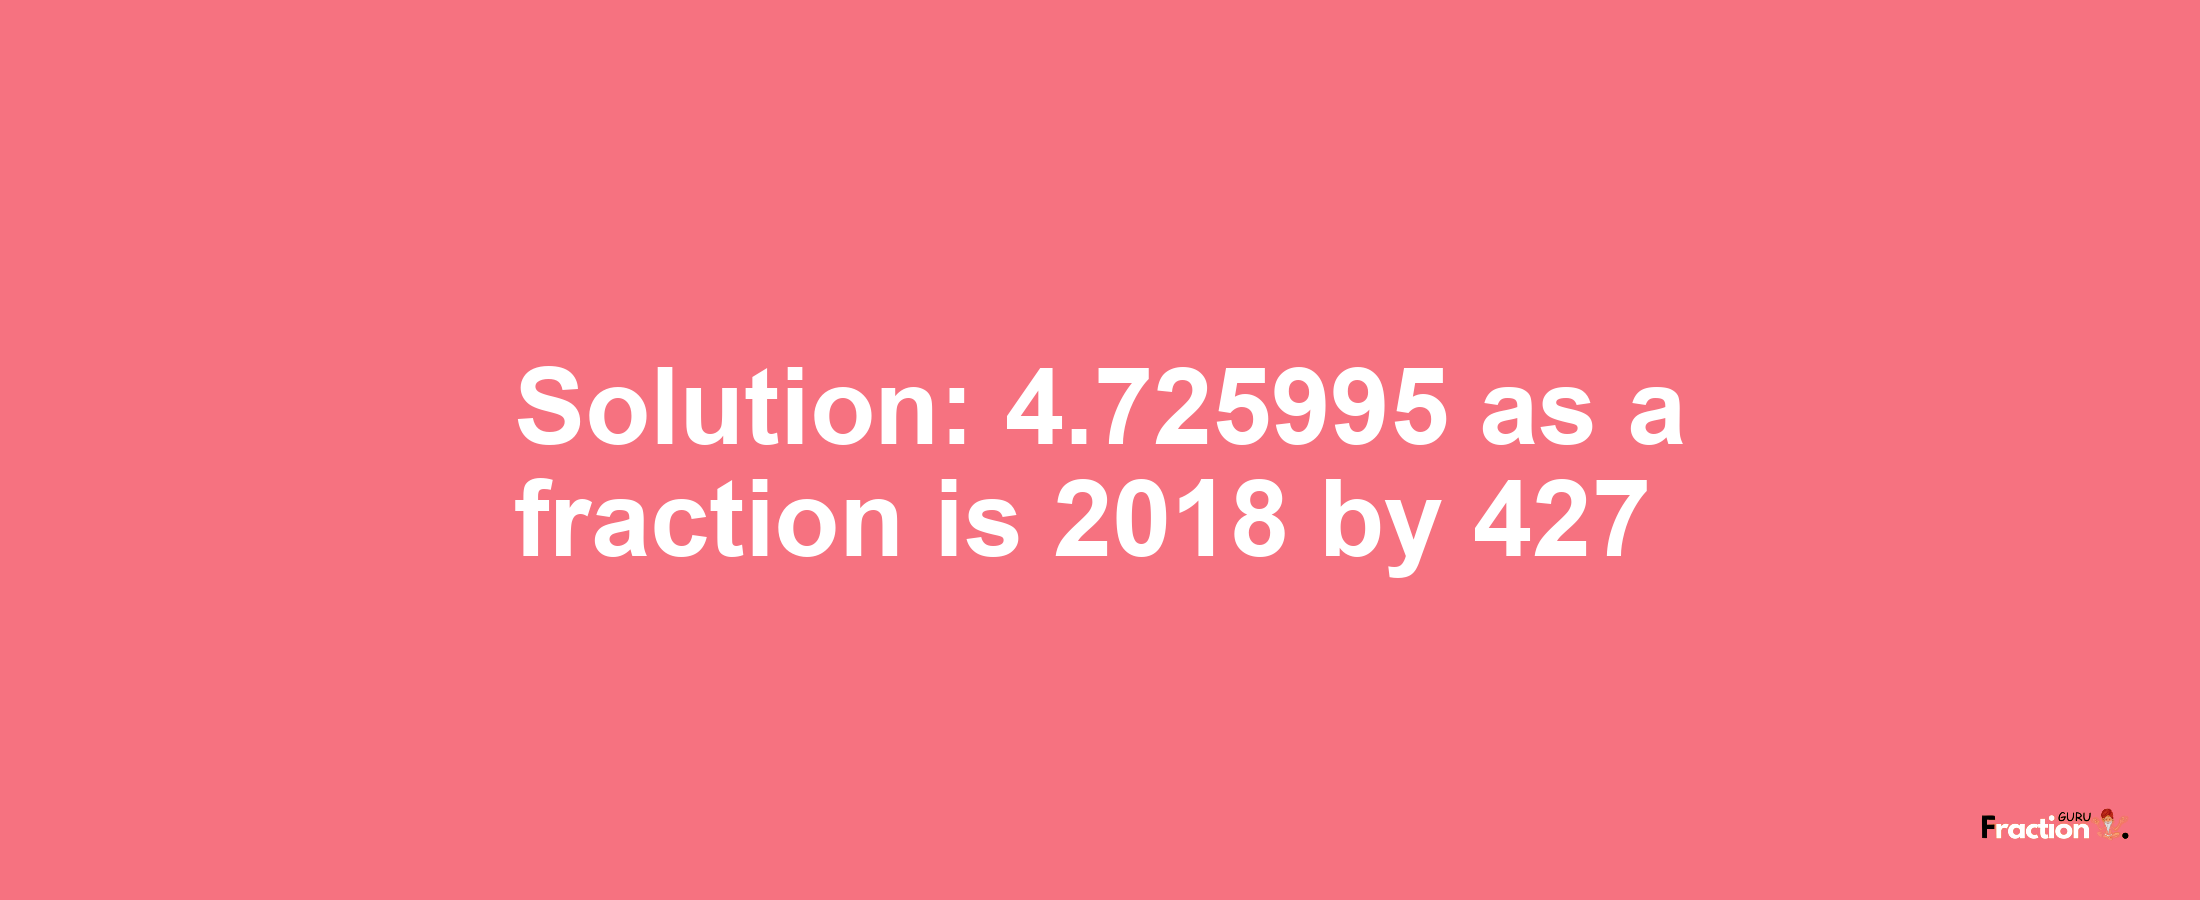 Solution:4.725995 as a fraction is 2018/427